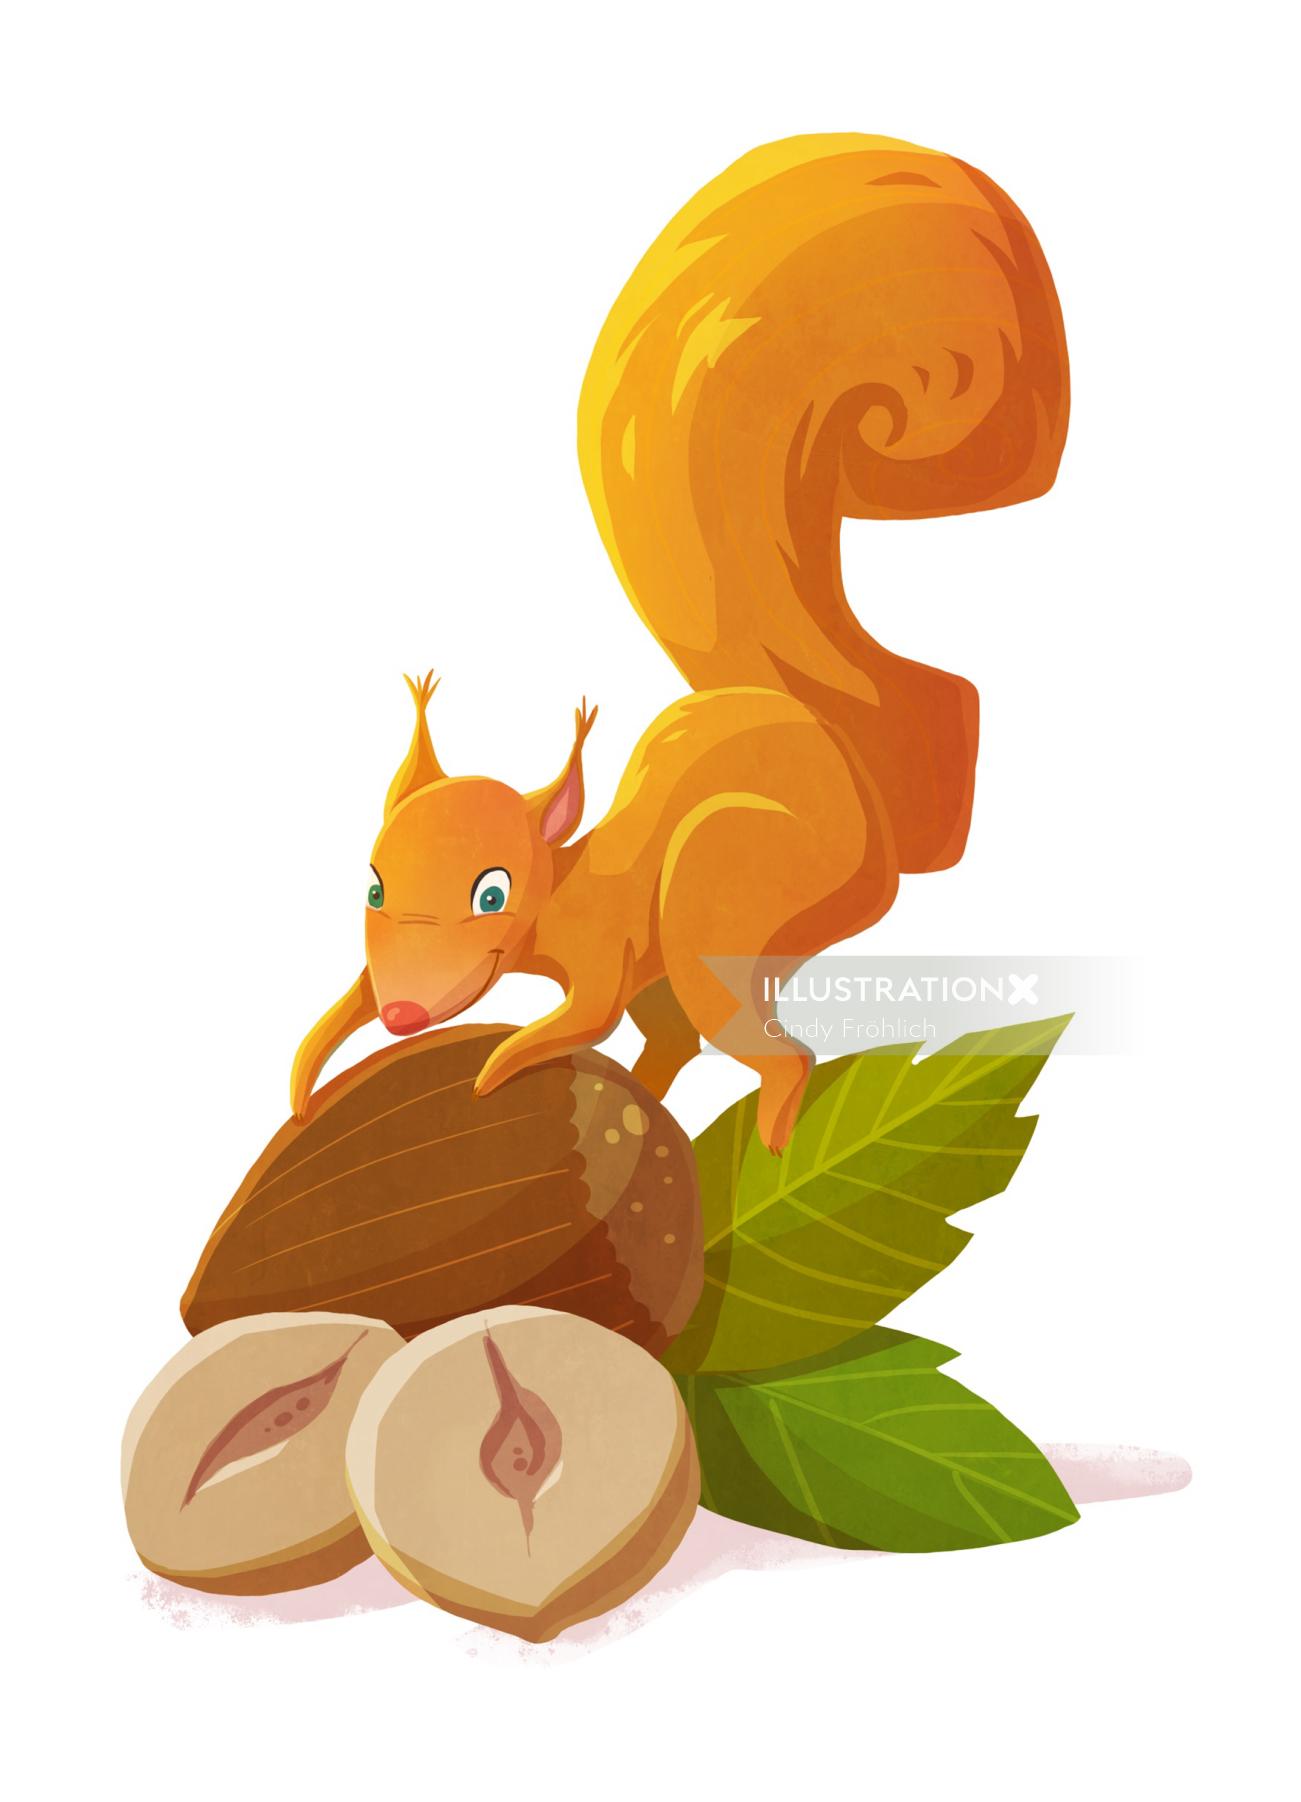 Red Squirrel animal character design by Cindy Fröhlich